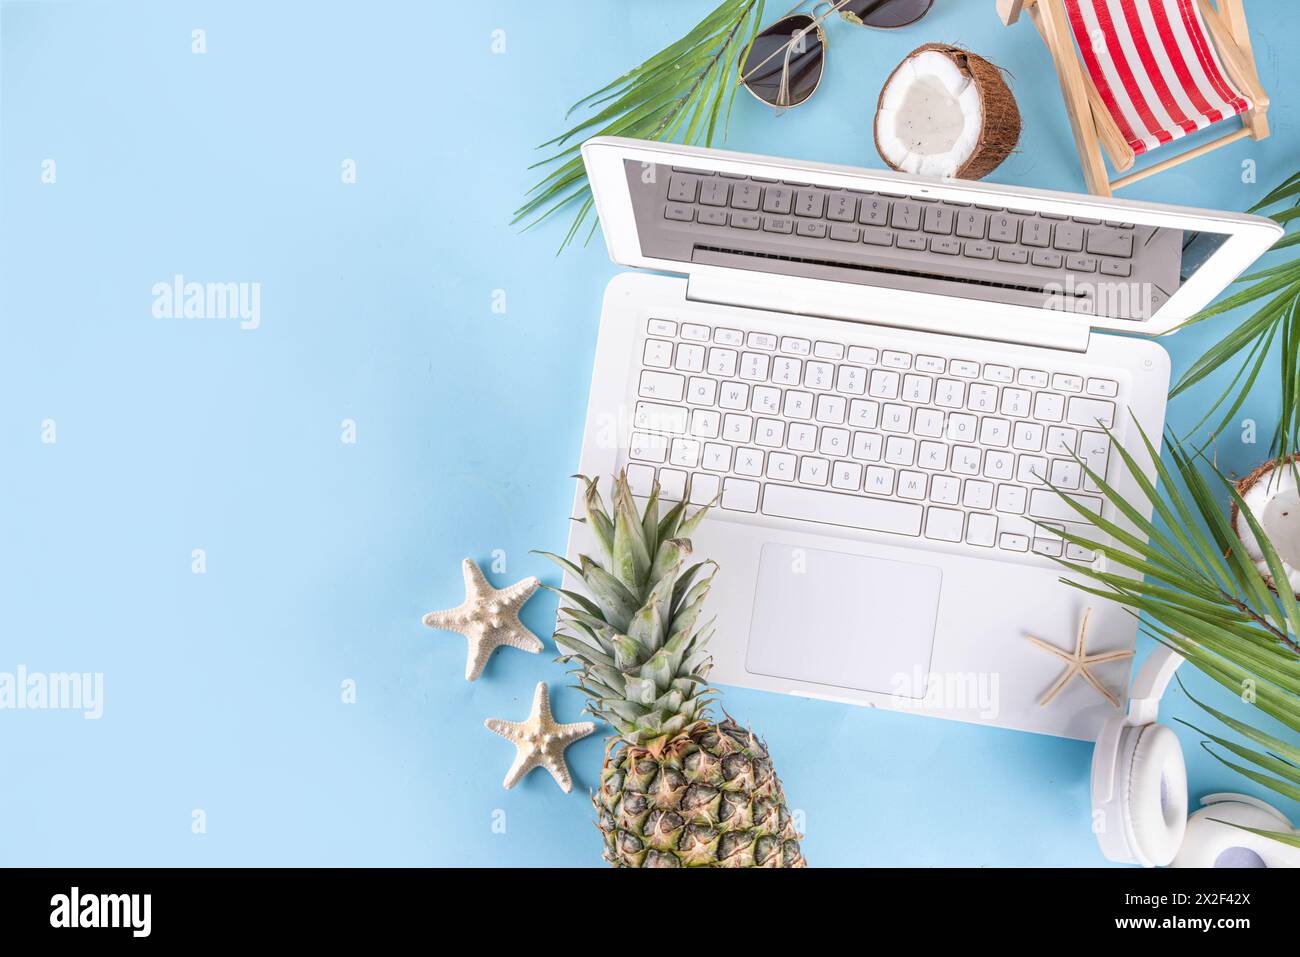 Work and vacation. Creative summer beach office flat lay with white laptop, tropical summer accessories, palm tree leaves, sunglasses, flip flops, pin Stock Photo